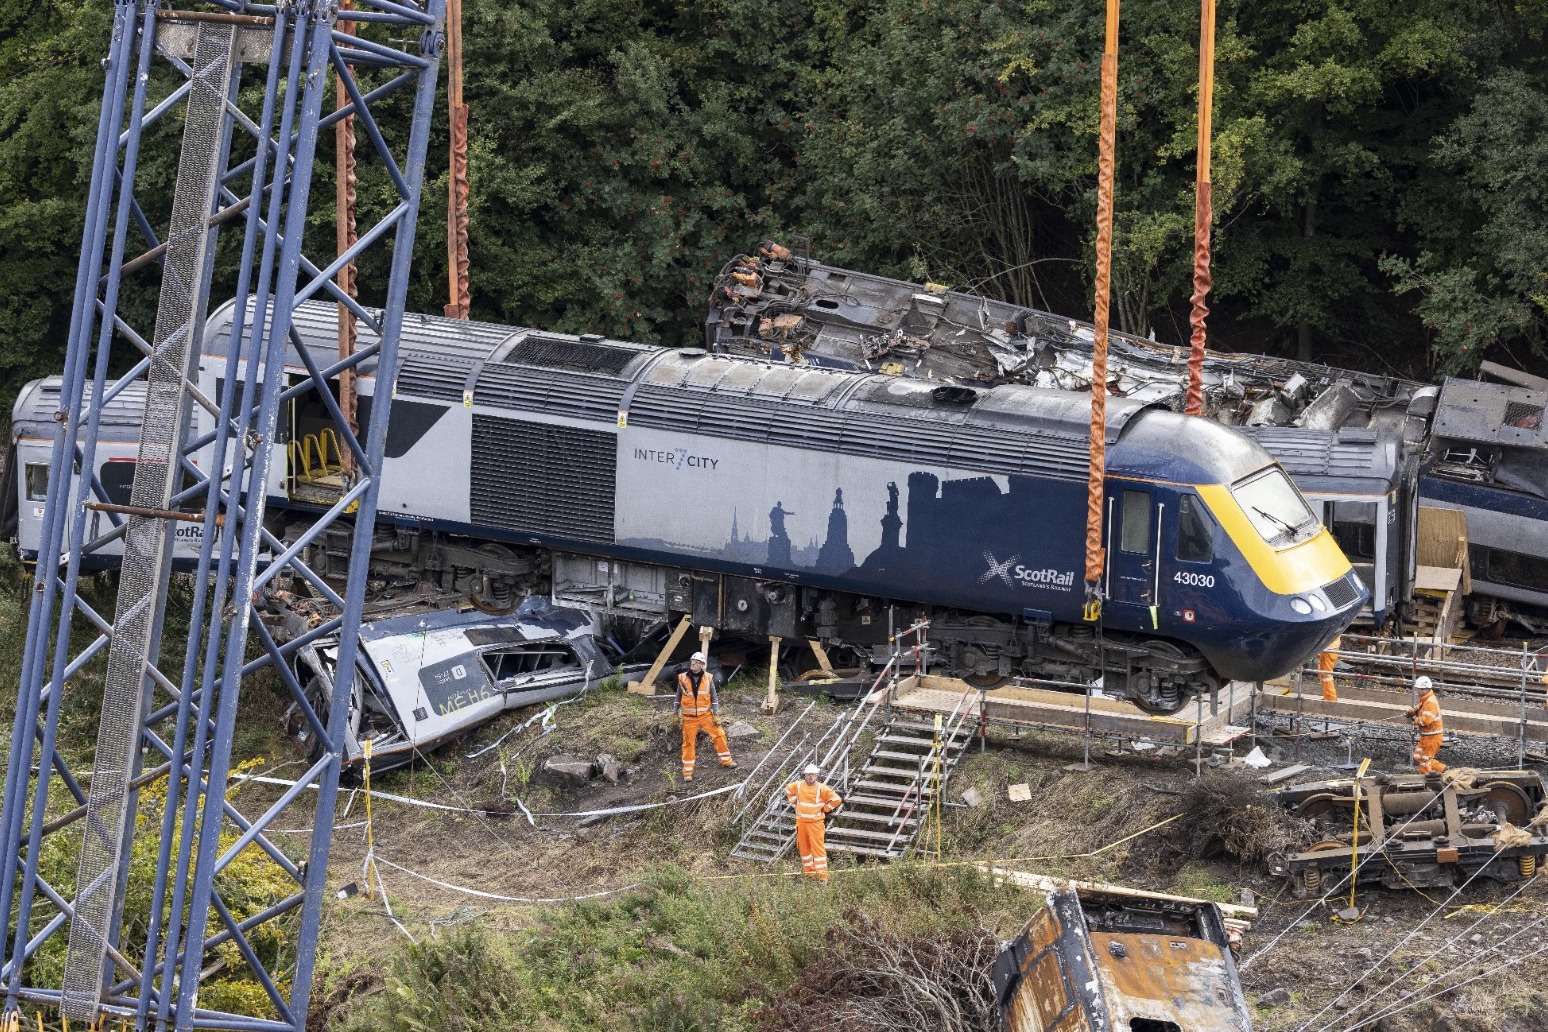 Network Rail admits health and safety failings over fatal derailment 